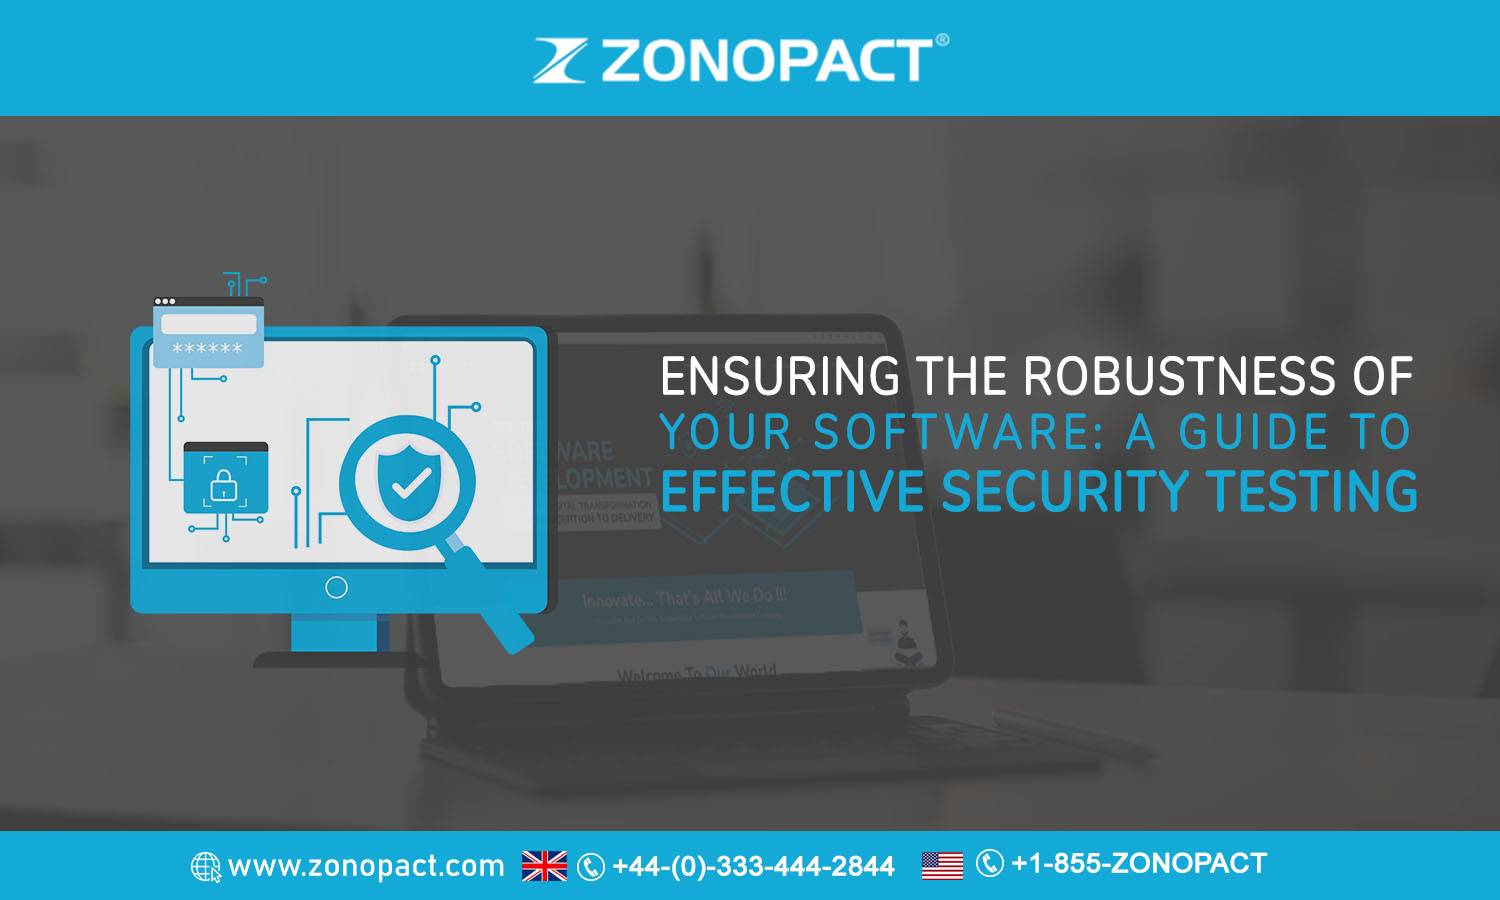 Ensuring the Robustness of Your Software (1)